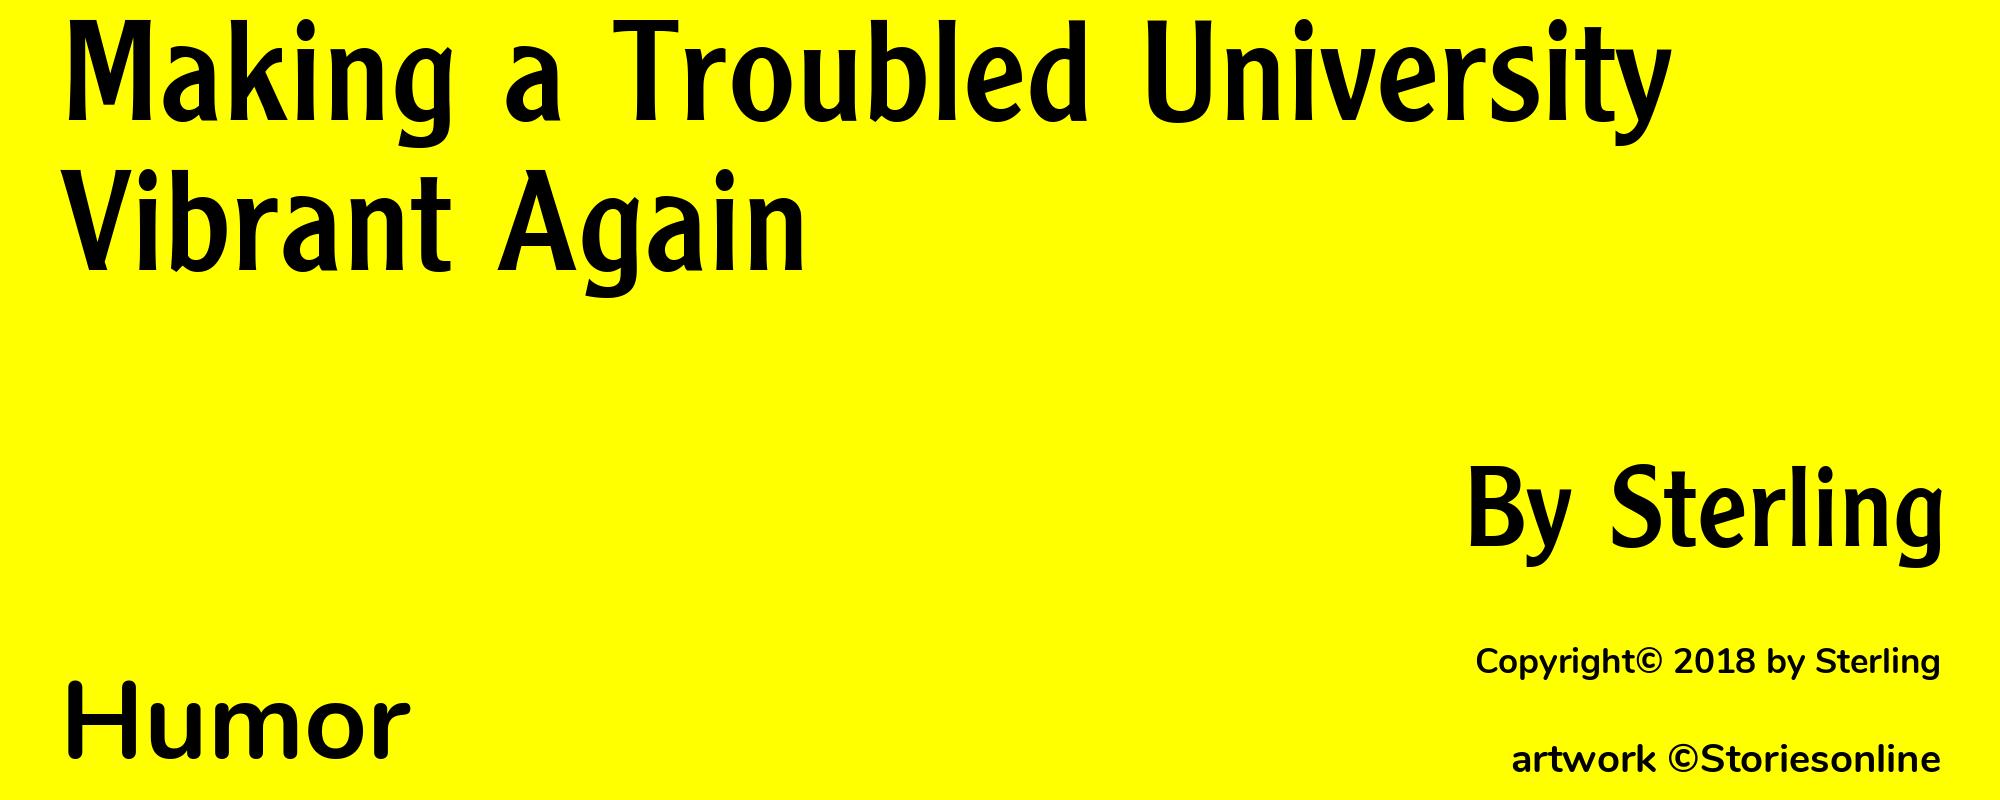 Making a Troubled University Vibrant Again - Cover